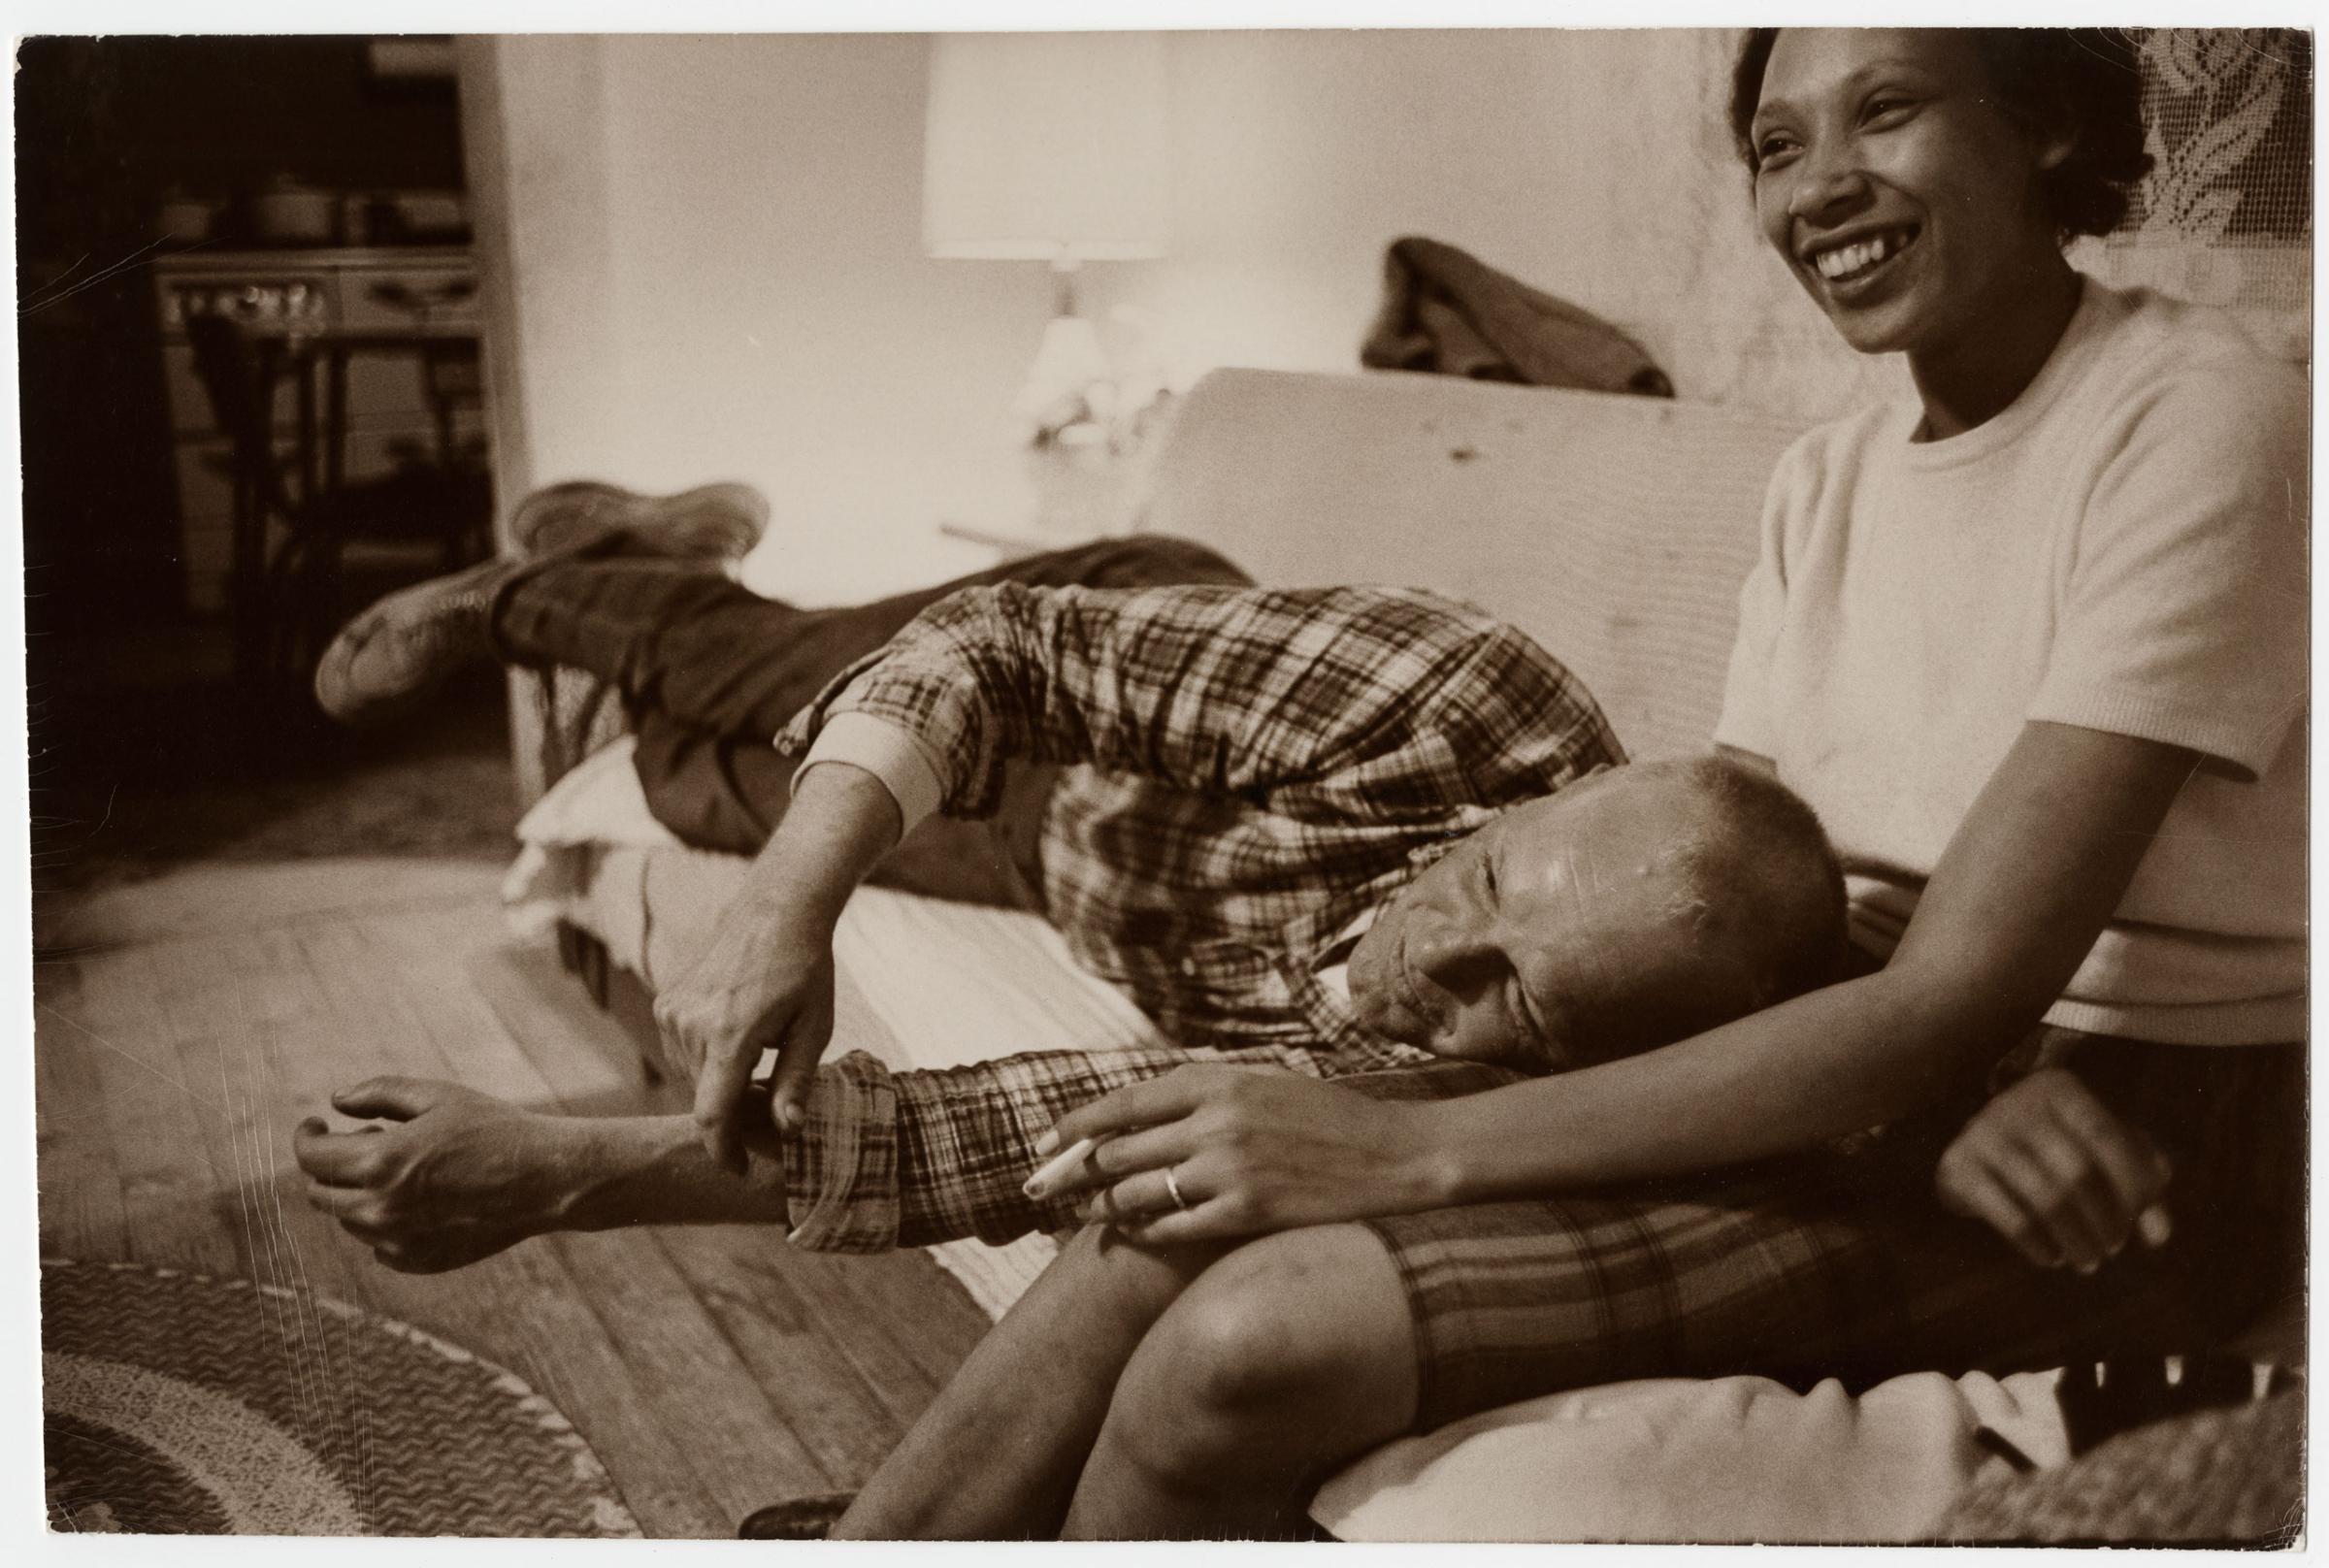 Richard and Mildred Loving laugh while watching television in their living room, King and Queen County, Virginia, April 1965.